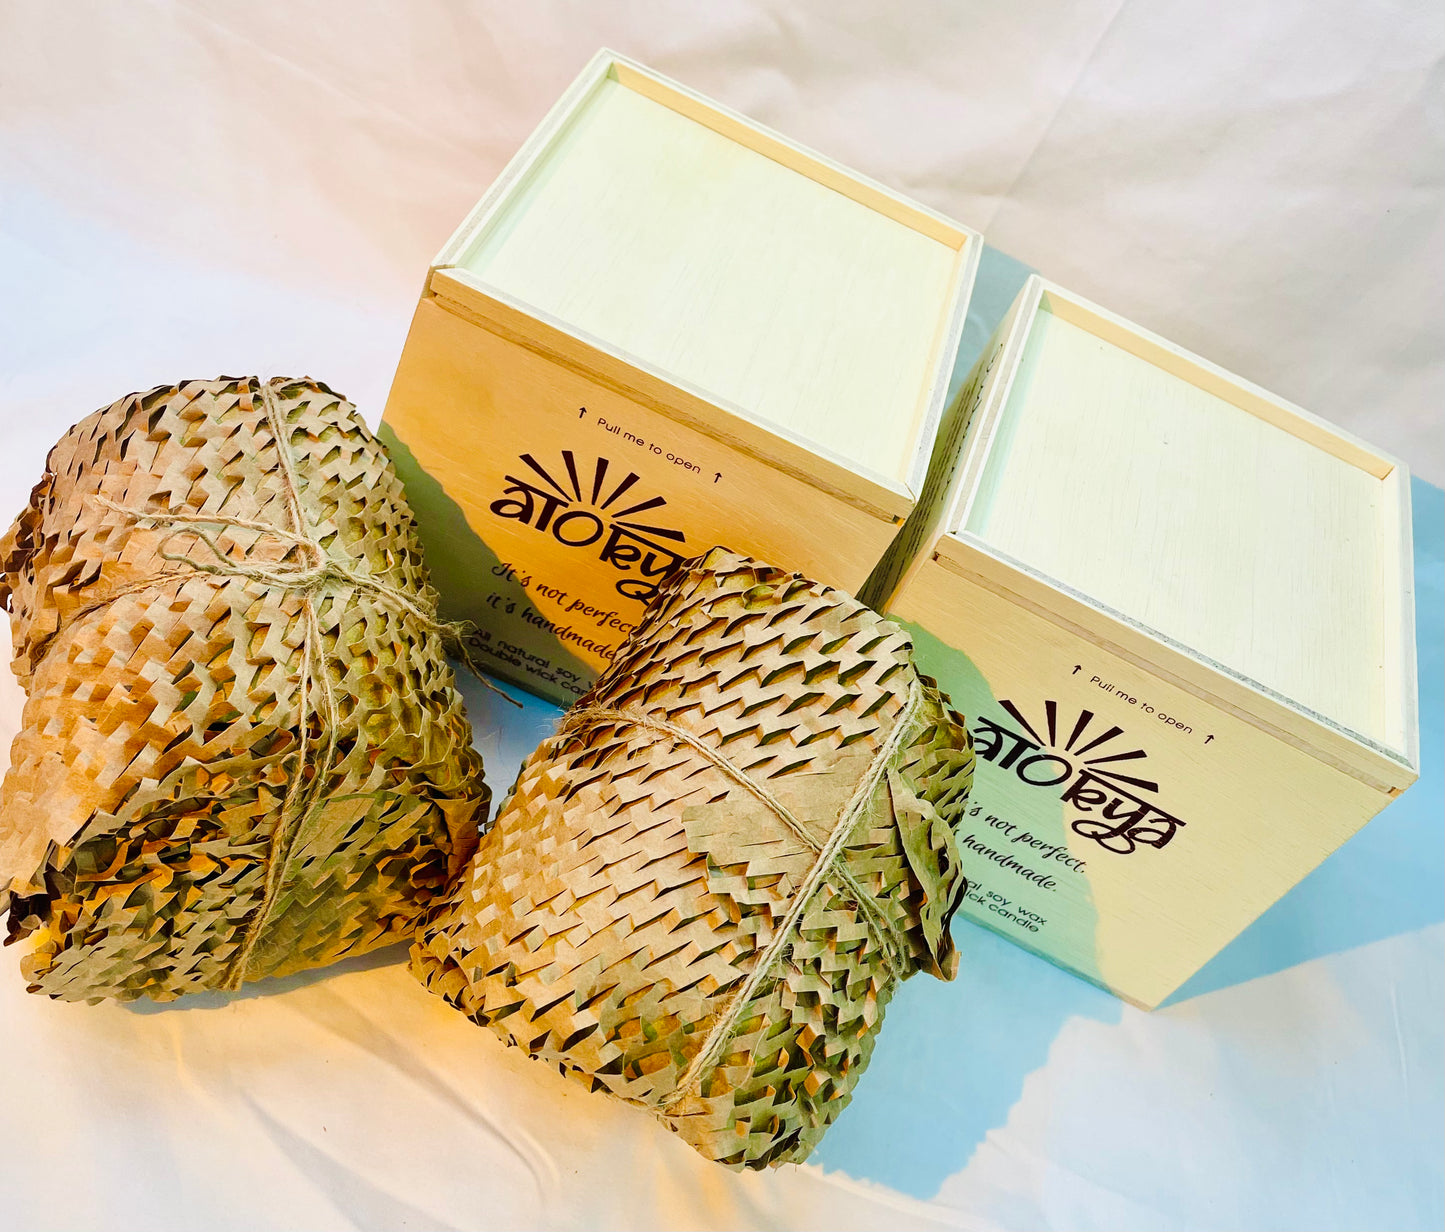 Two 100% natural soy wax scented candles wrapped in honeycomb paper are placed near two brown wood boxes.